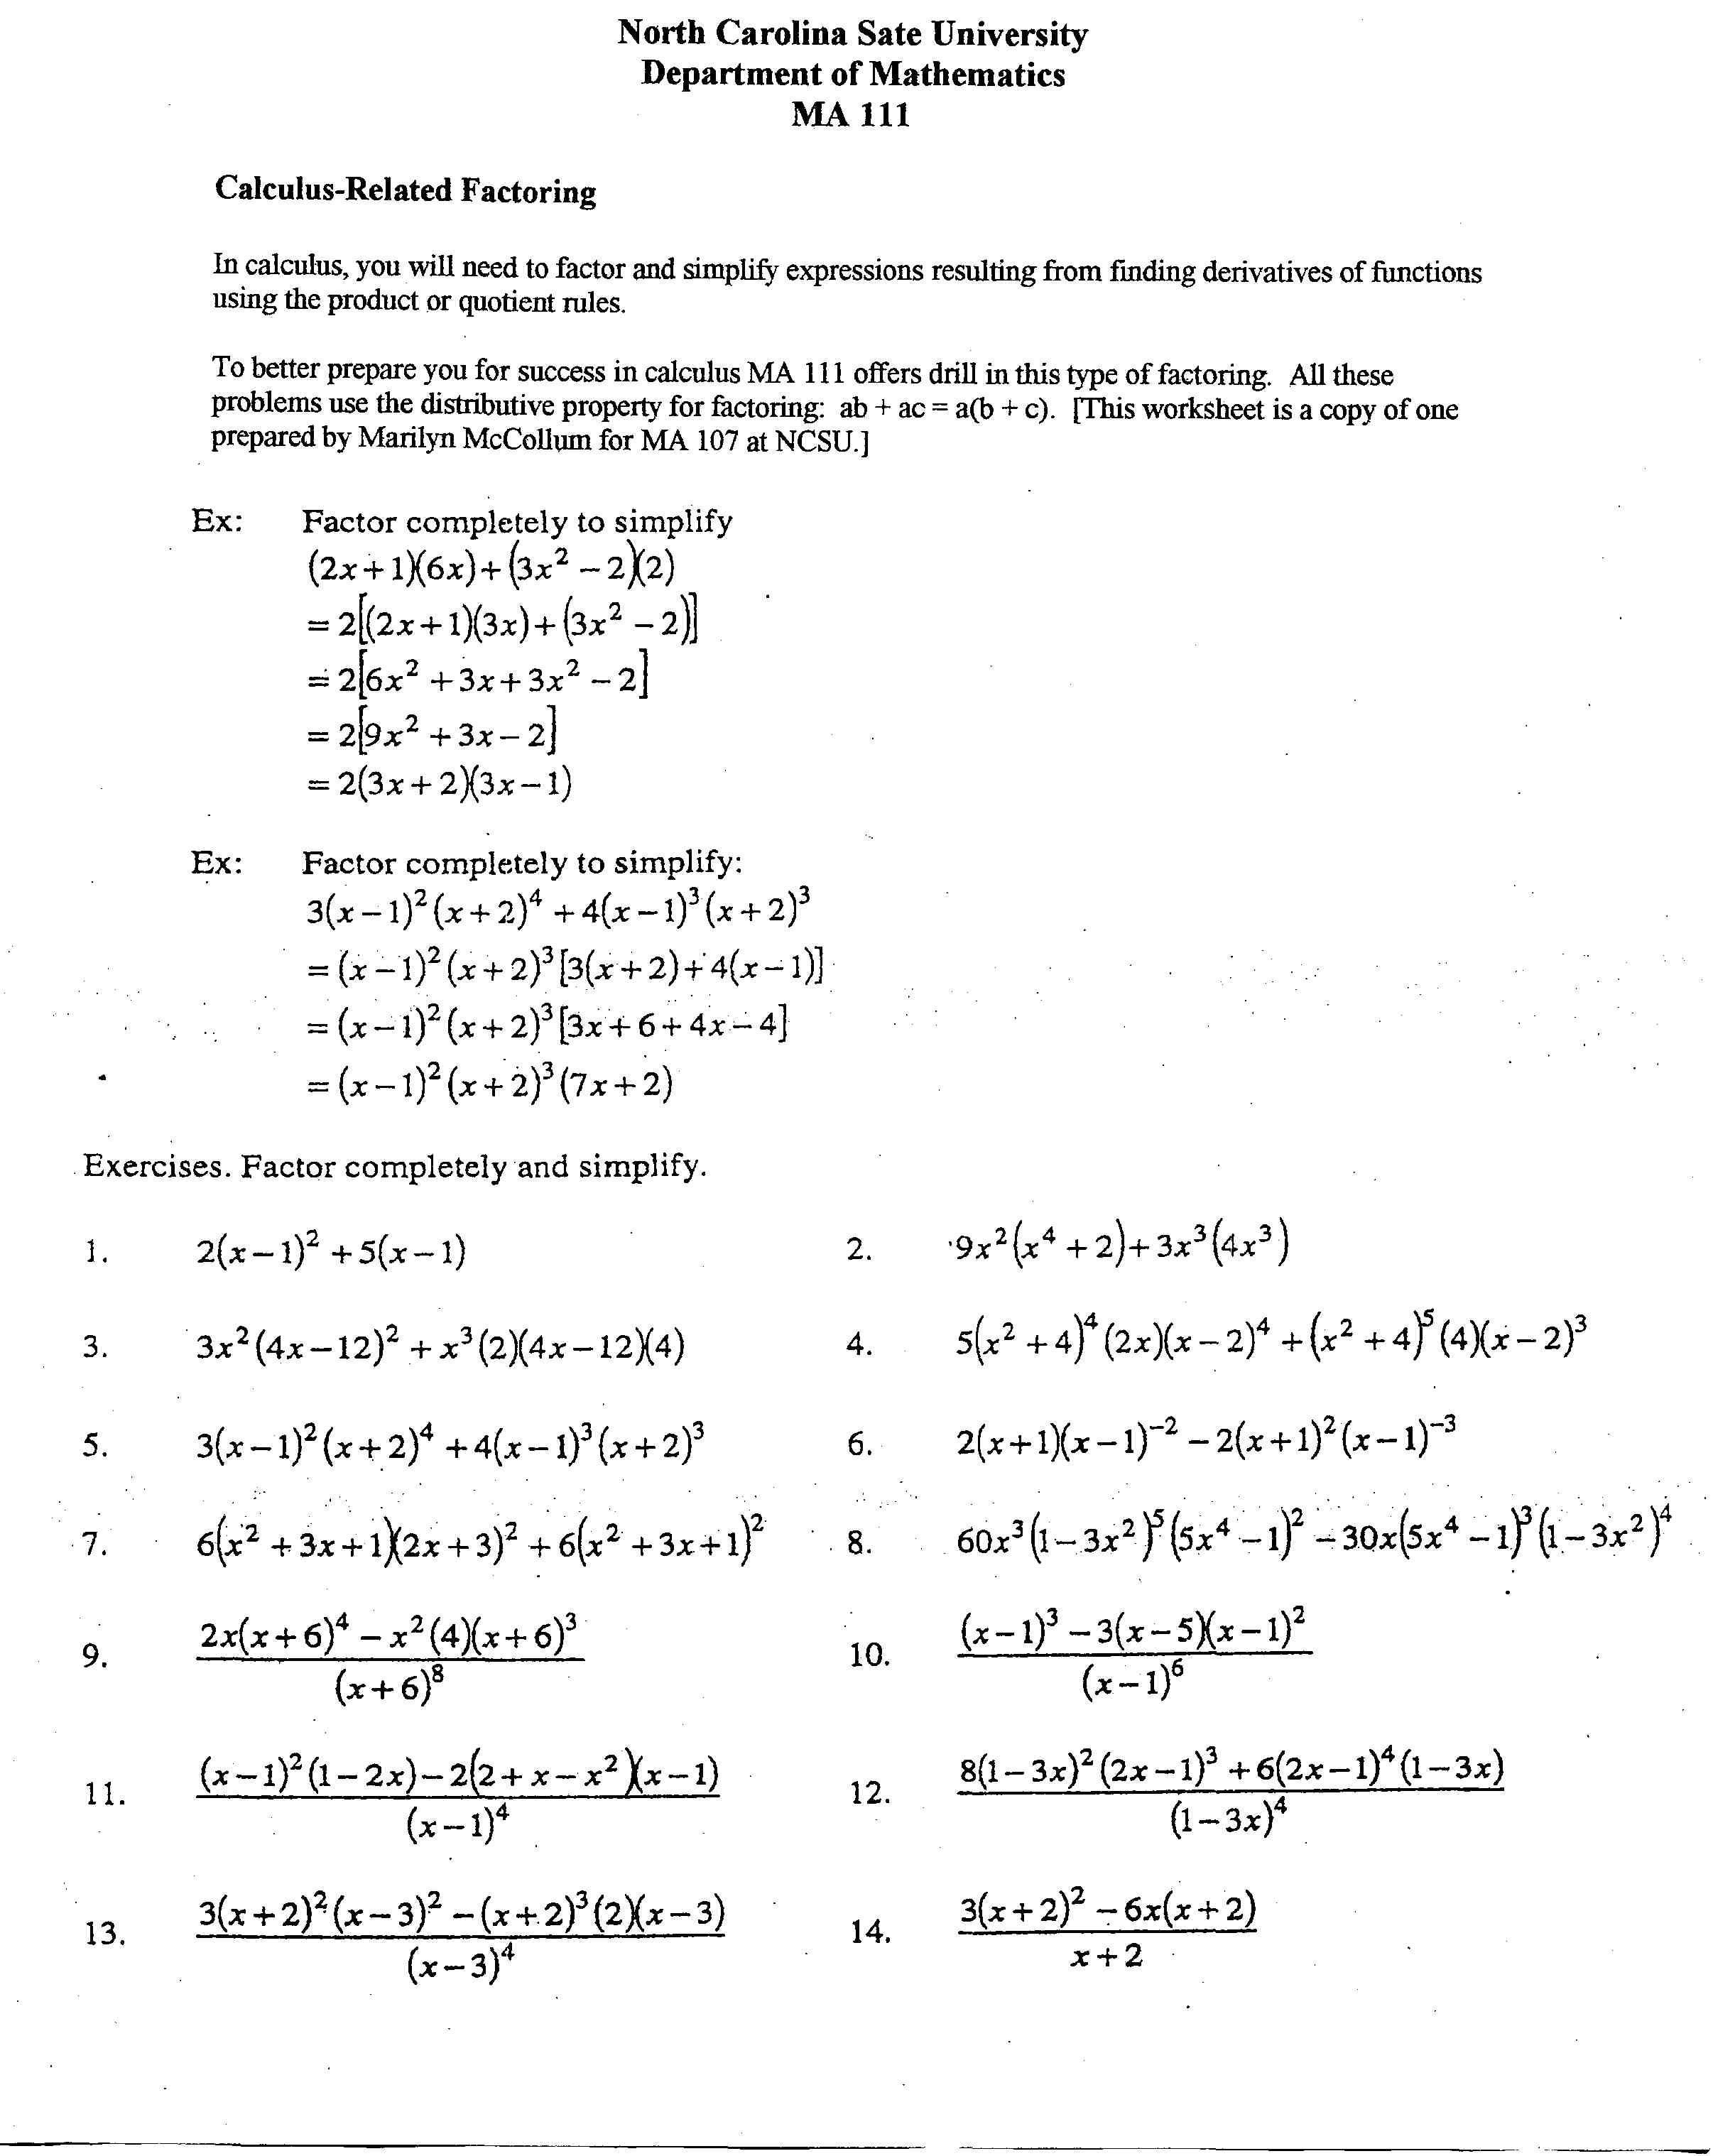 Factoring Using The Distributive Property Worksheet  Yooob Within Factoring Using The Distributive Property Worksheet